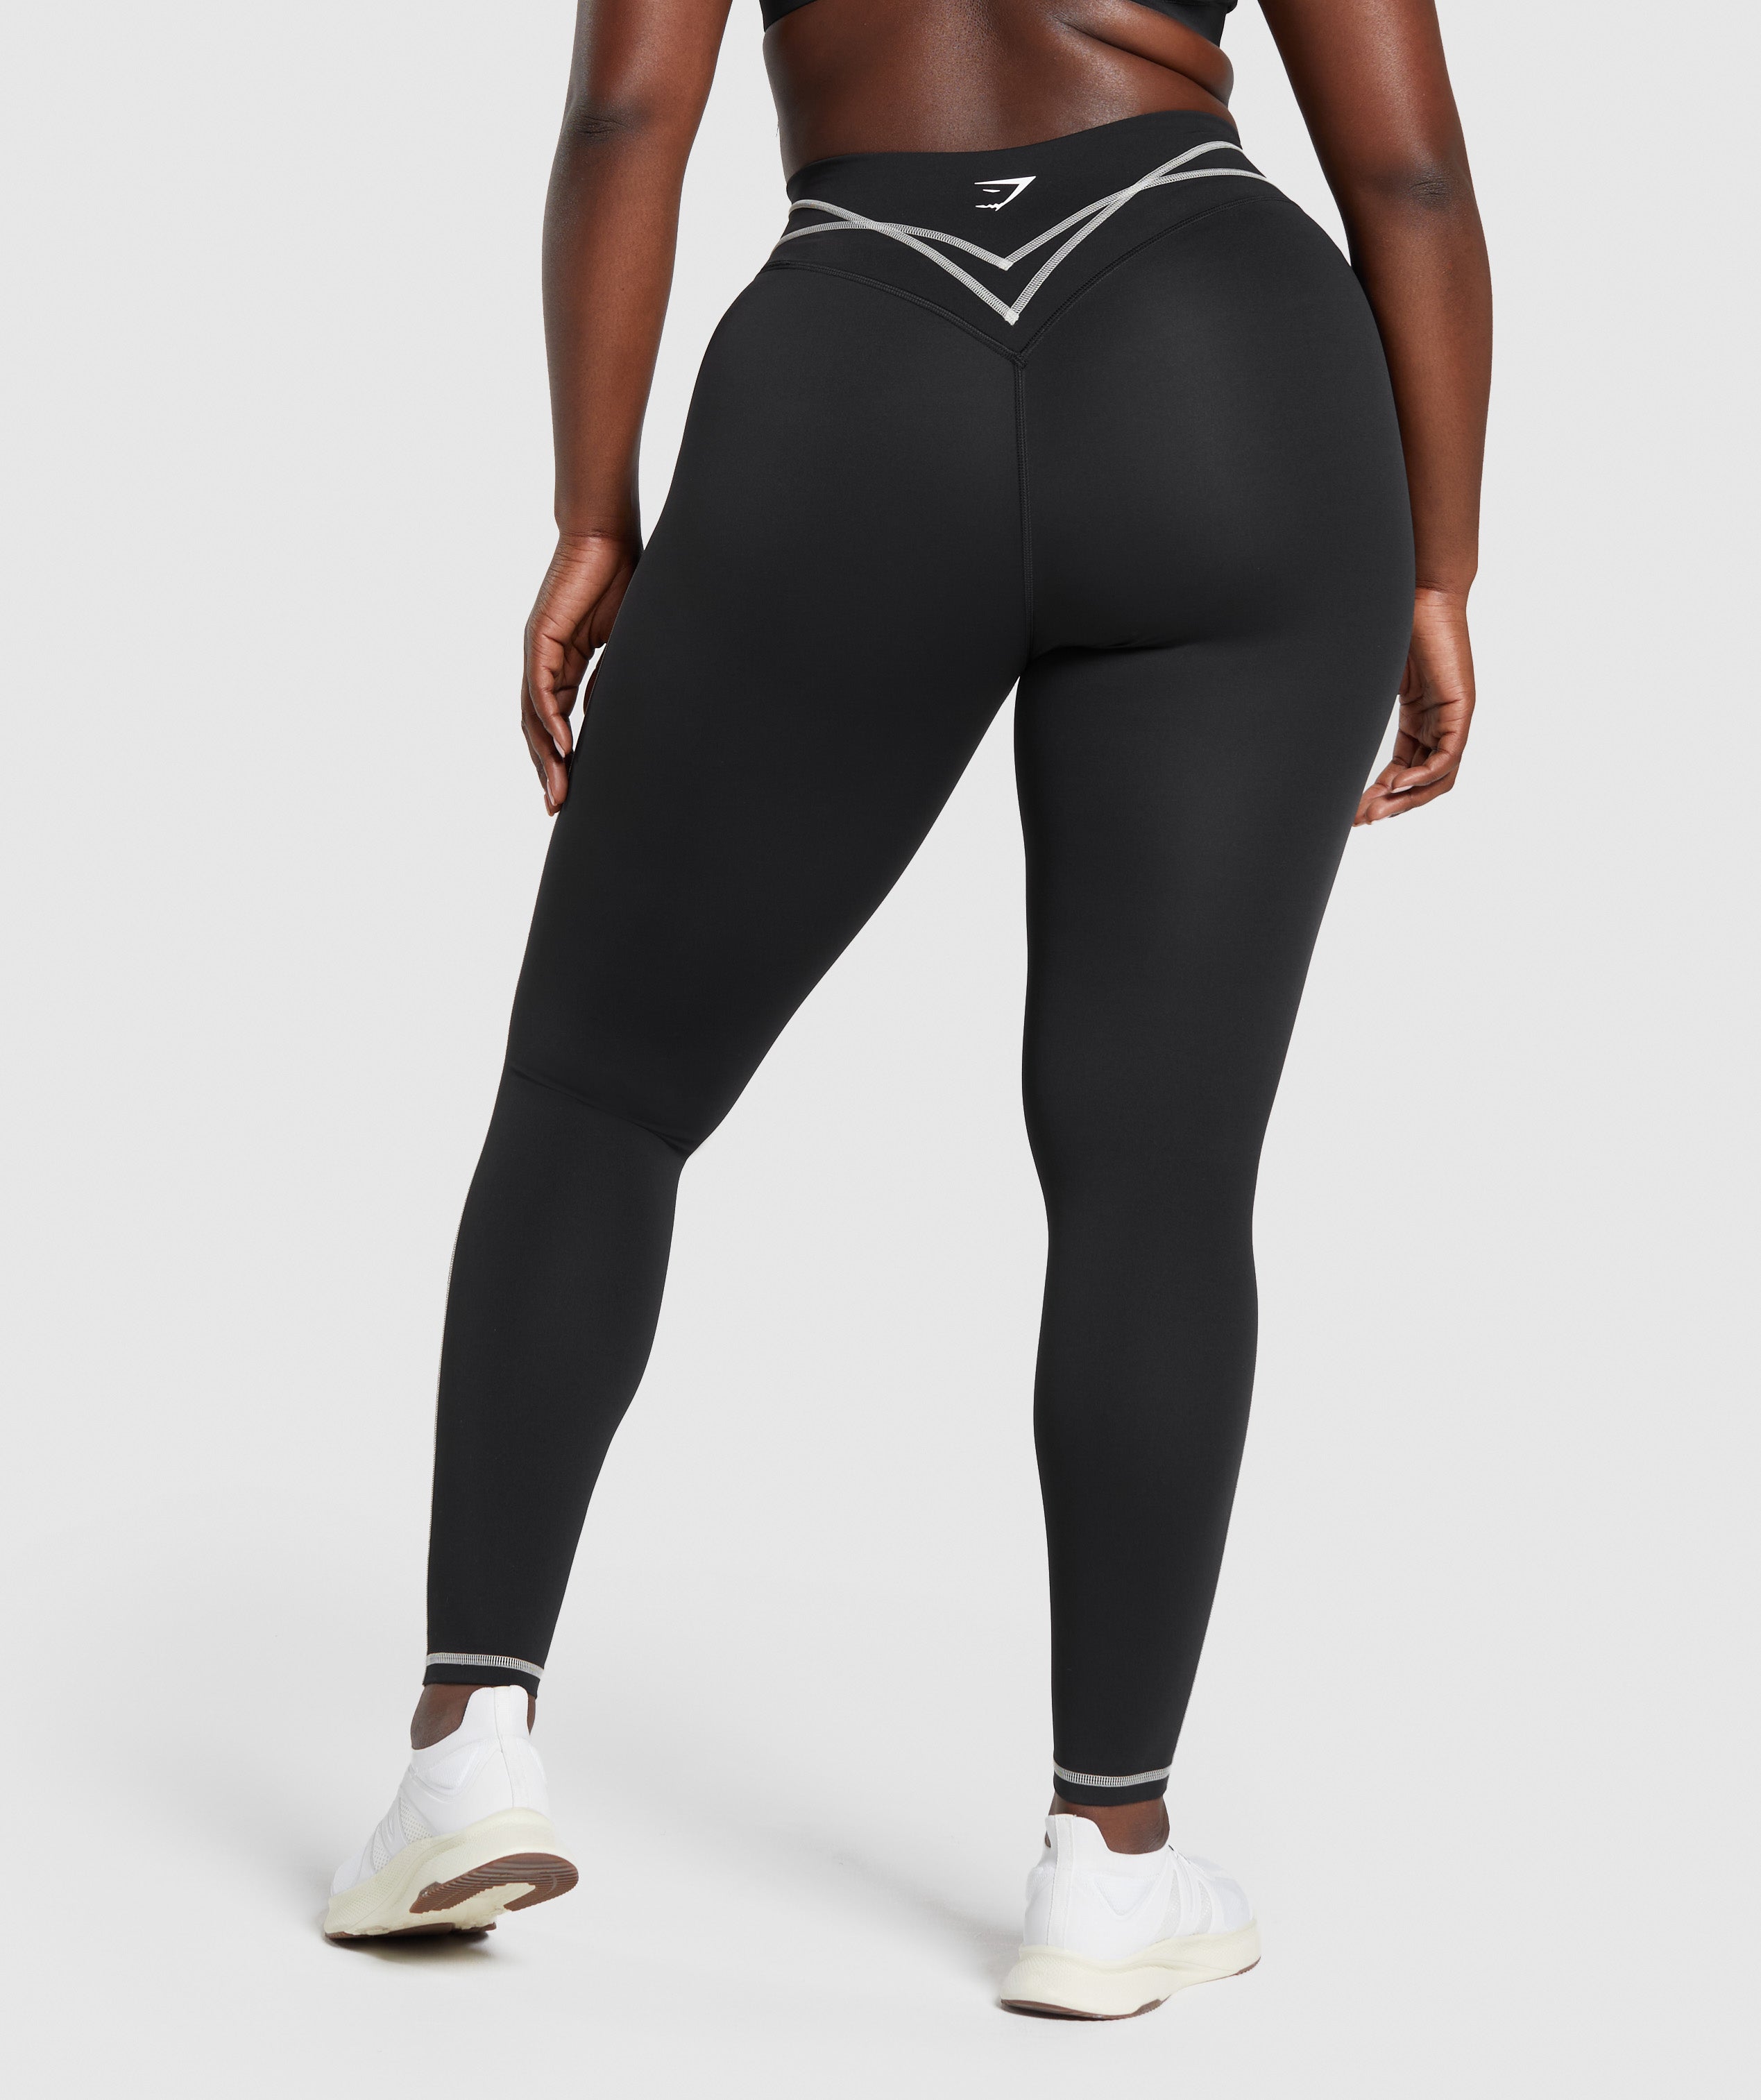 Gymshark Black Training Graphic Leggings Size XS - $35 (22% Off Retail) -  From Christie